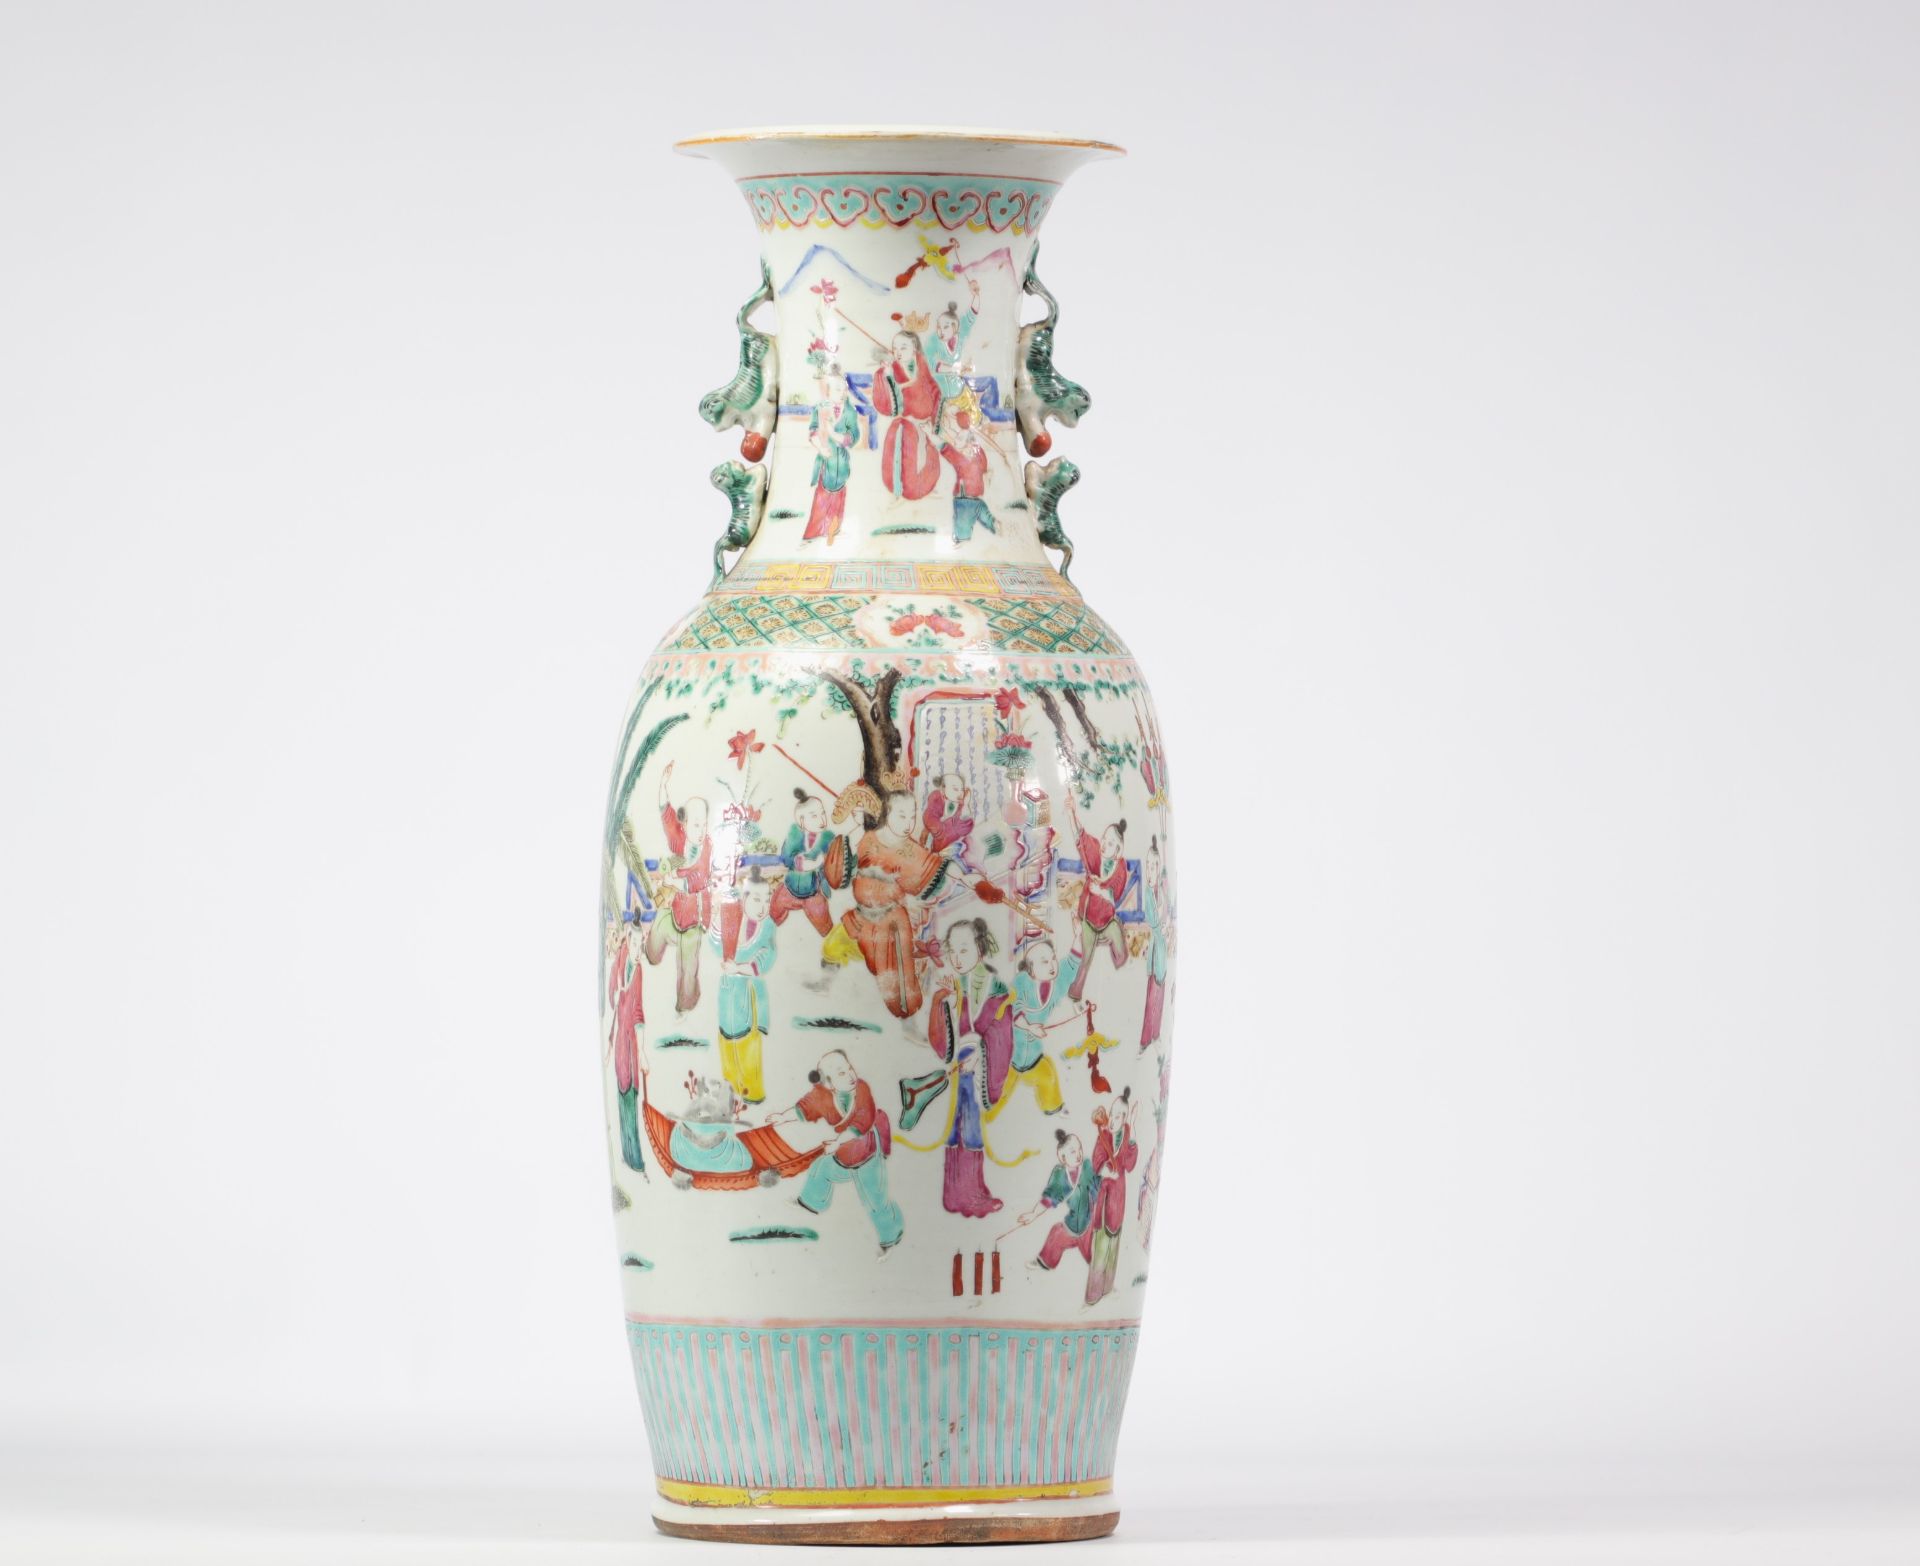 Large porcelain vase, famille rose, decorated with characters 19th century - Image 3 of 5